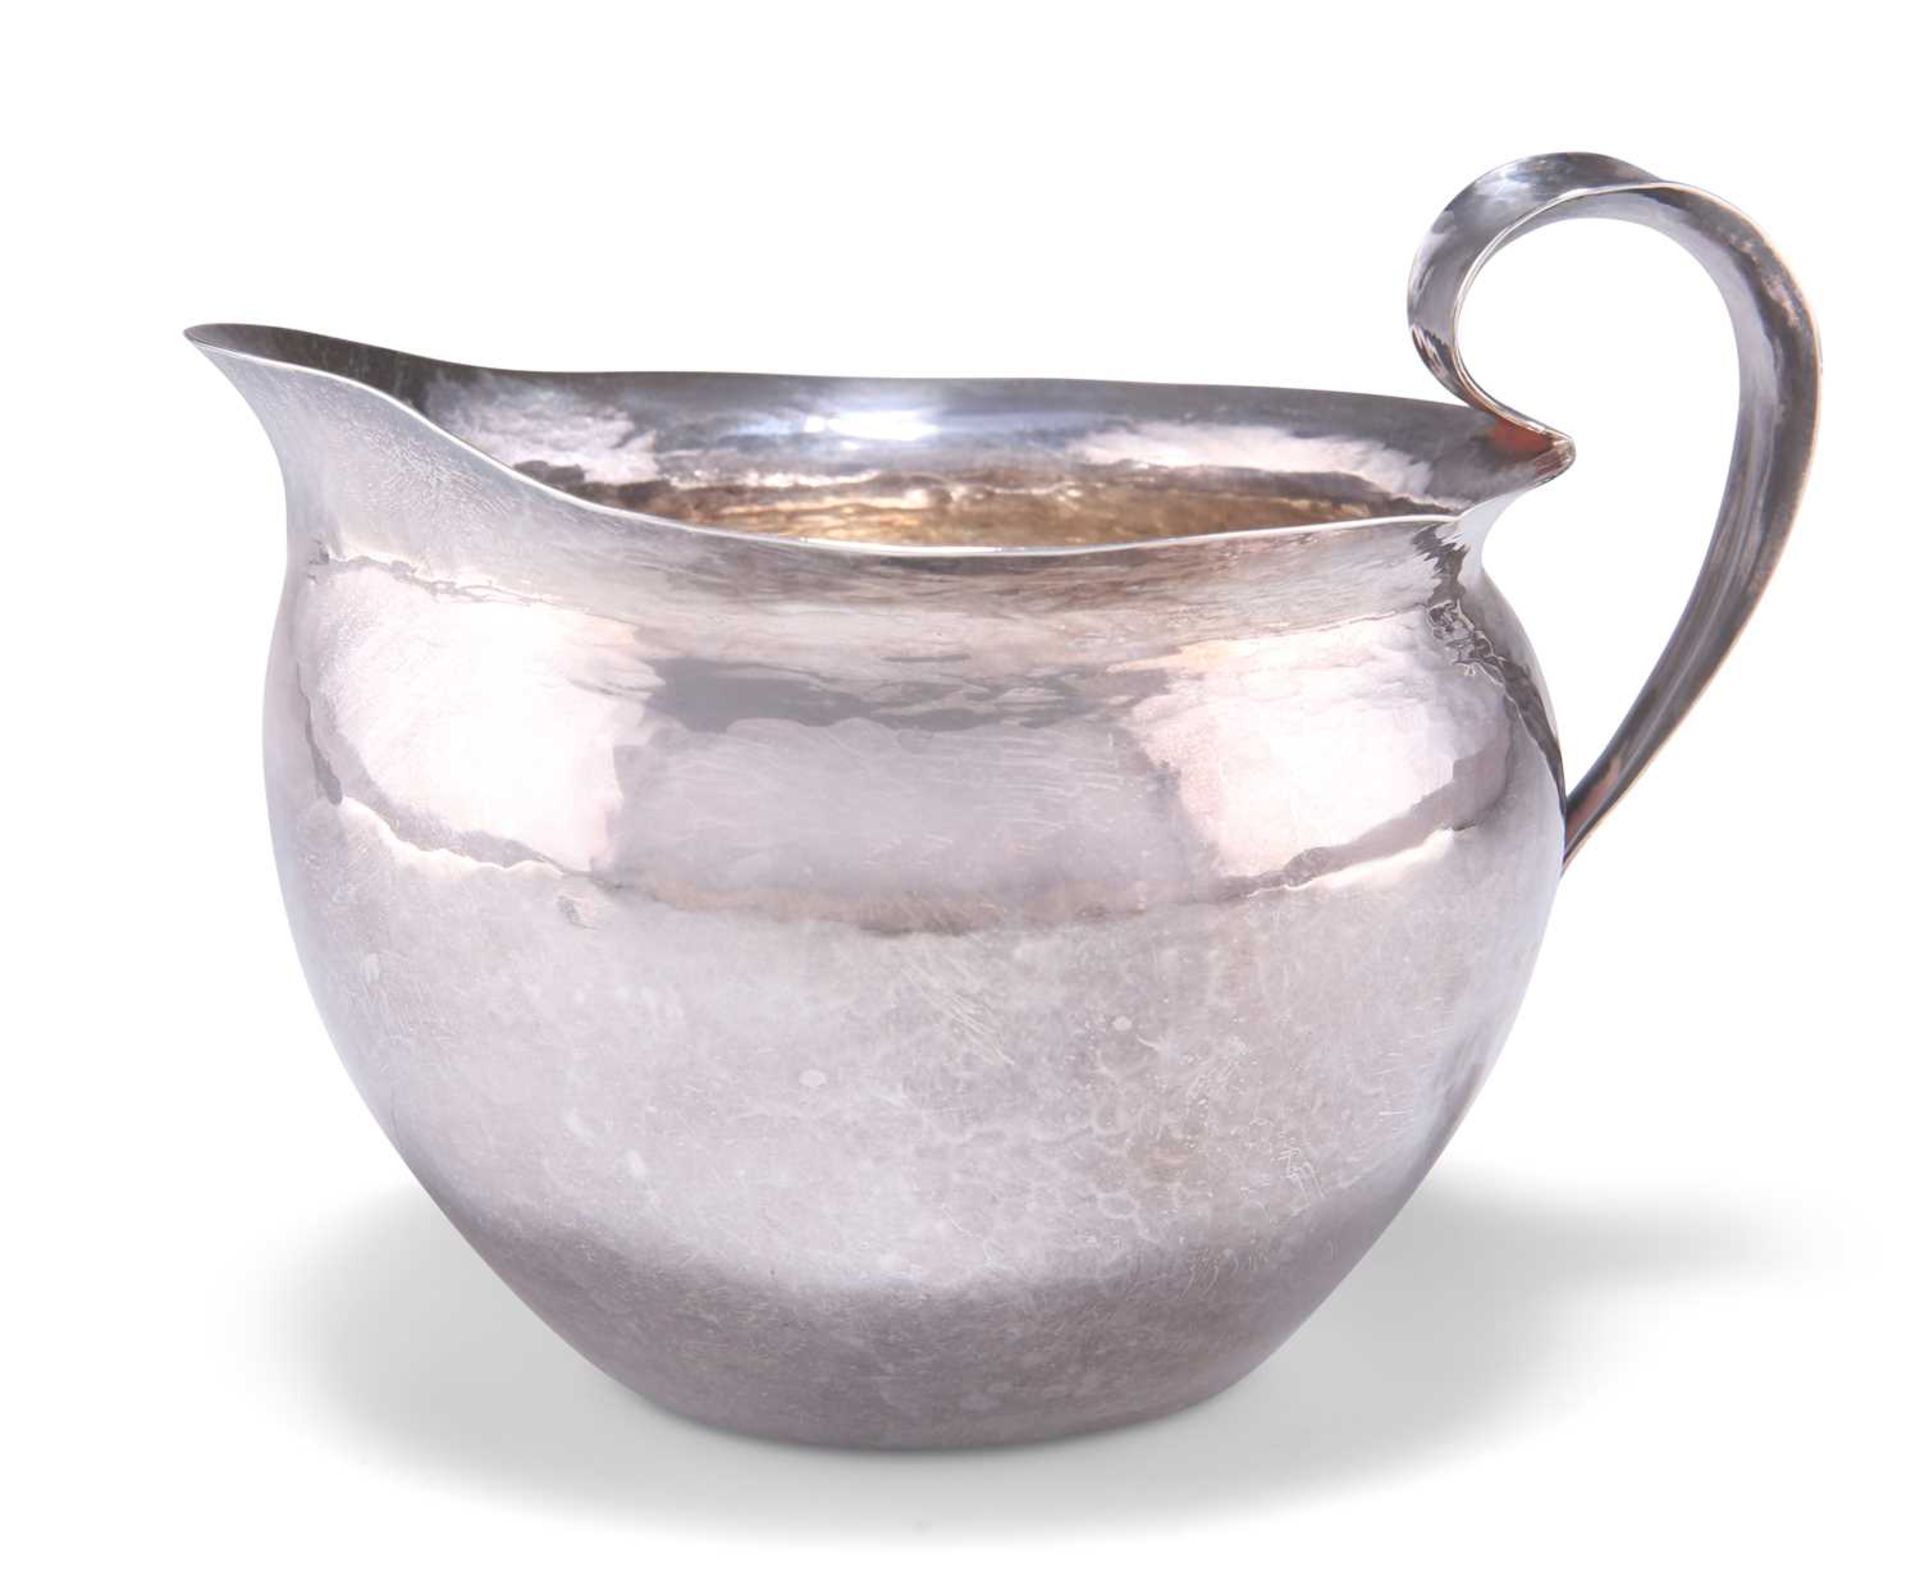 AN ARTS AND CRAFTS SPOT-HAMMERED SILVER JUG